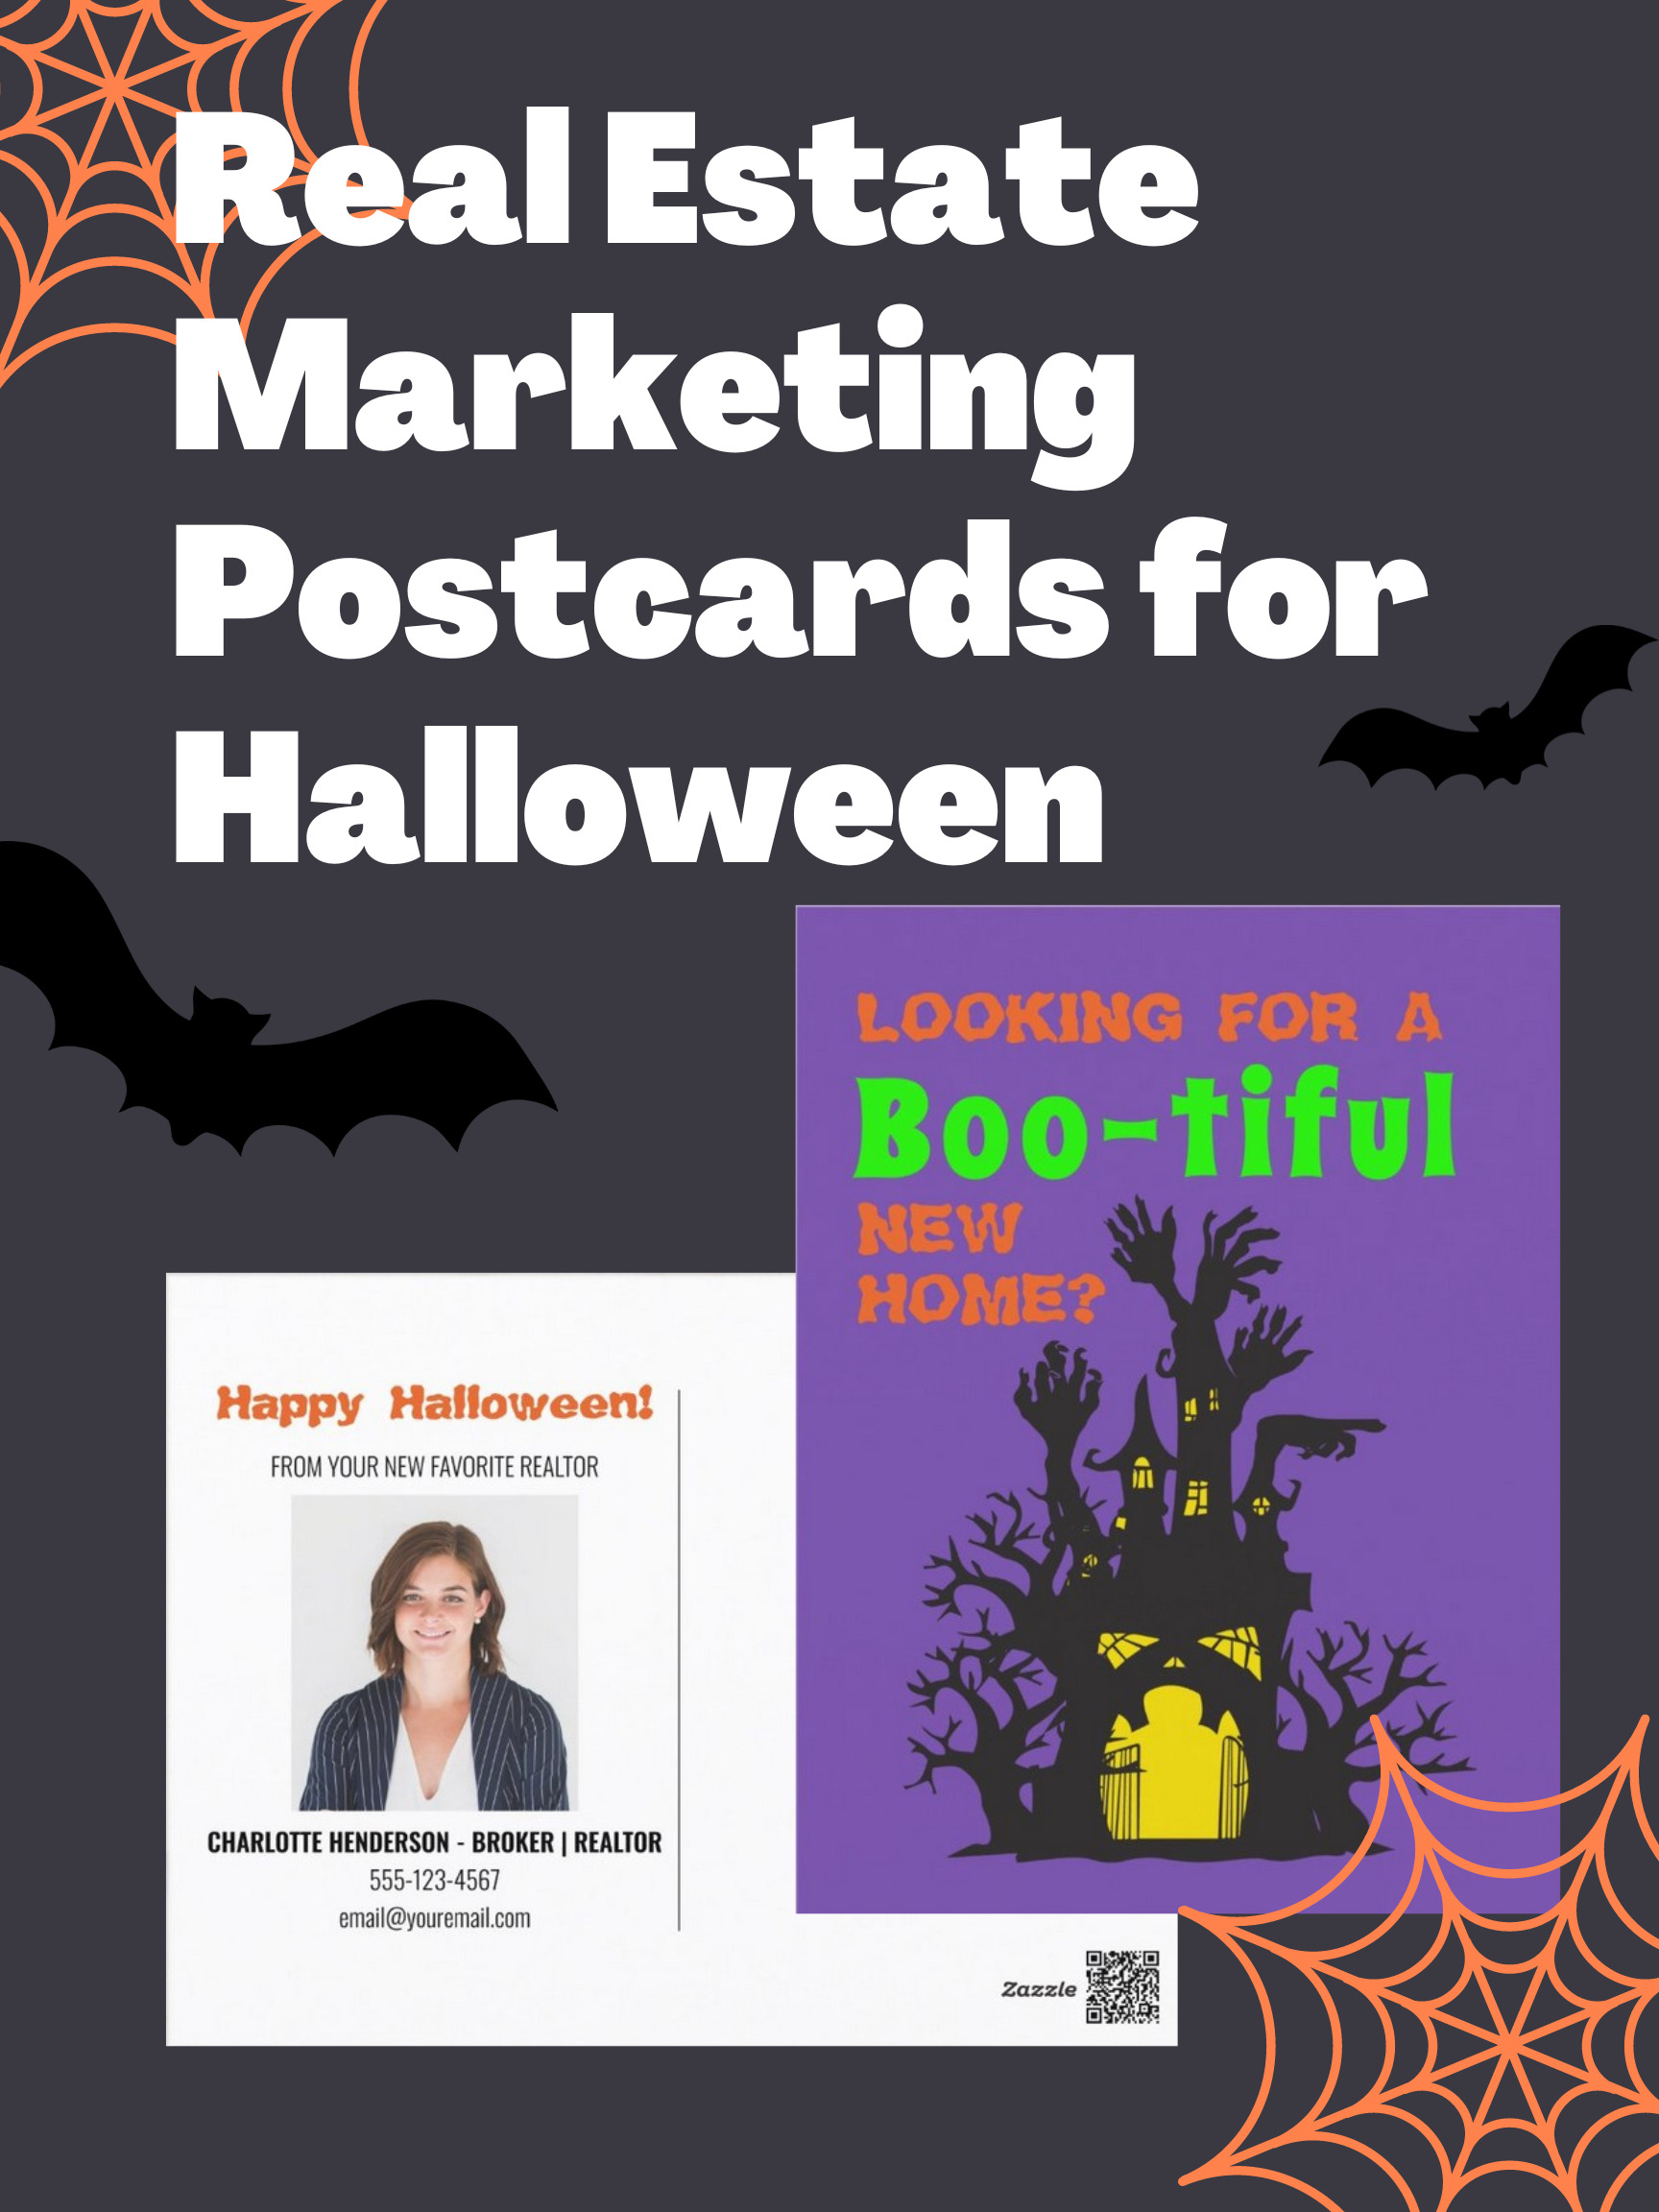 Real Estate Marketing Posecards for Halloween